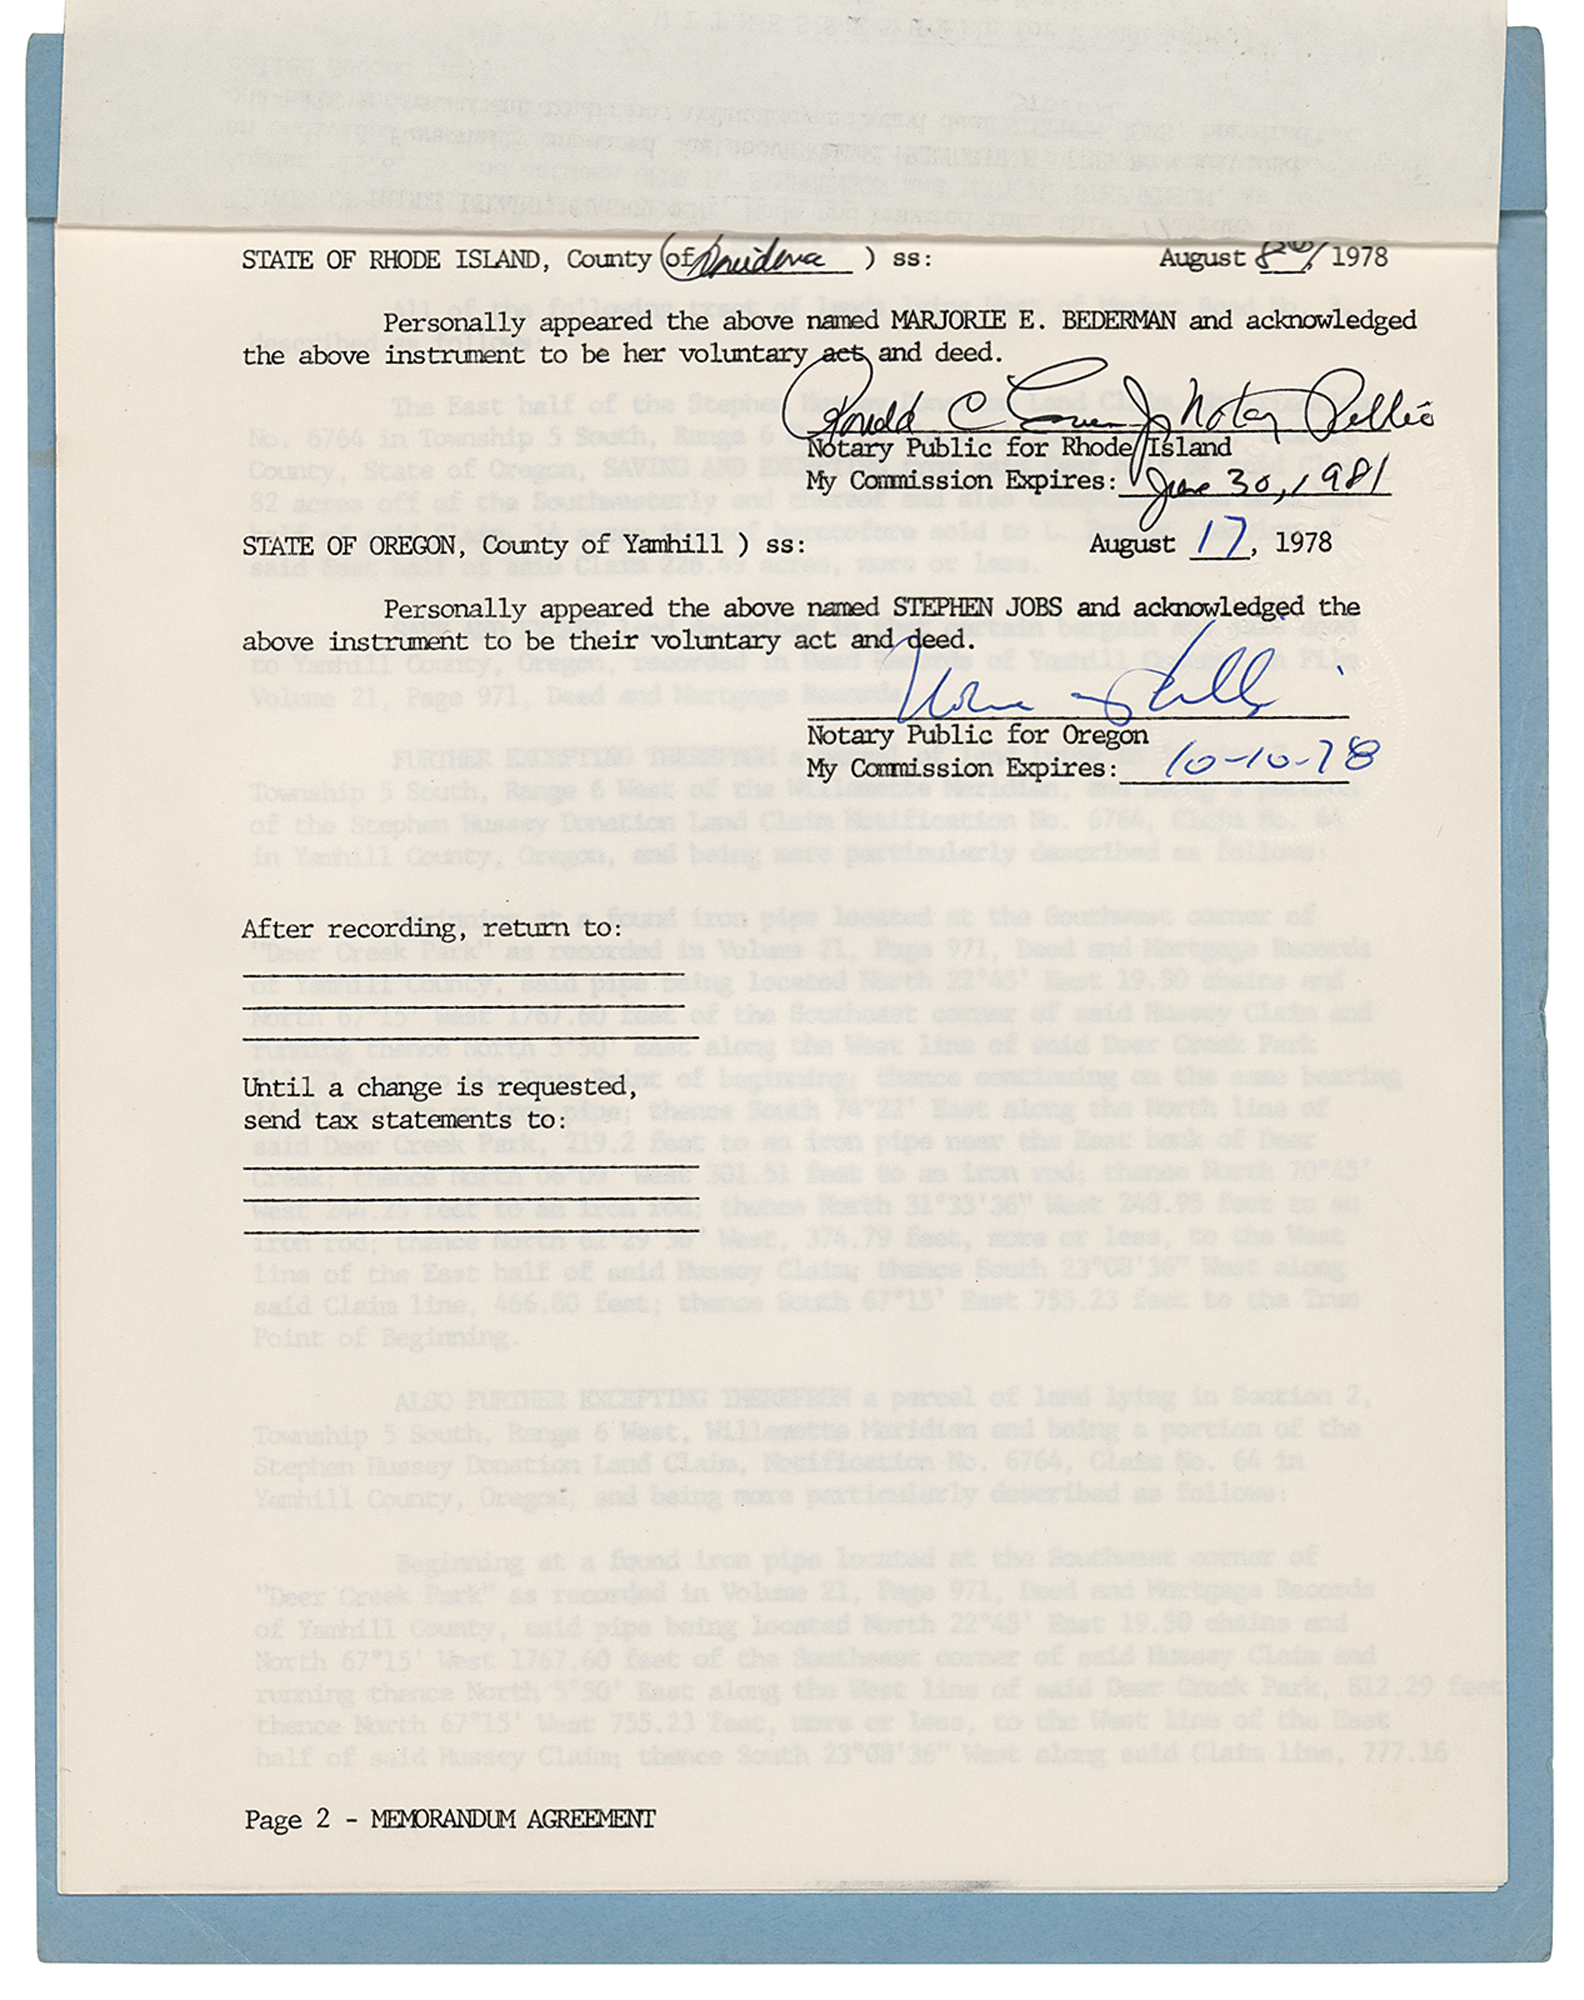 Lot #5080 Steve Jobs Signed Real Estate Document for Yamhill Country, Oregon (Home to Original 'Apple' Orchard) - Image 2